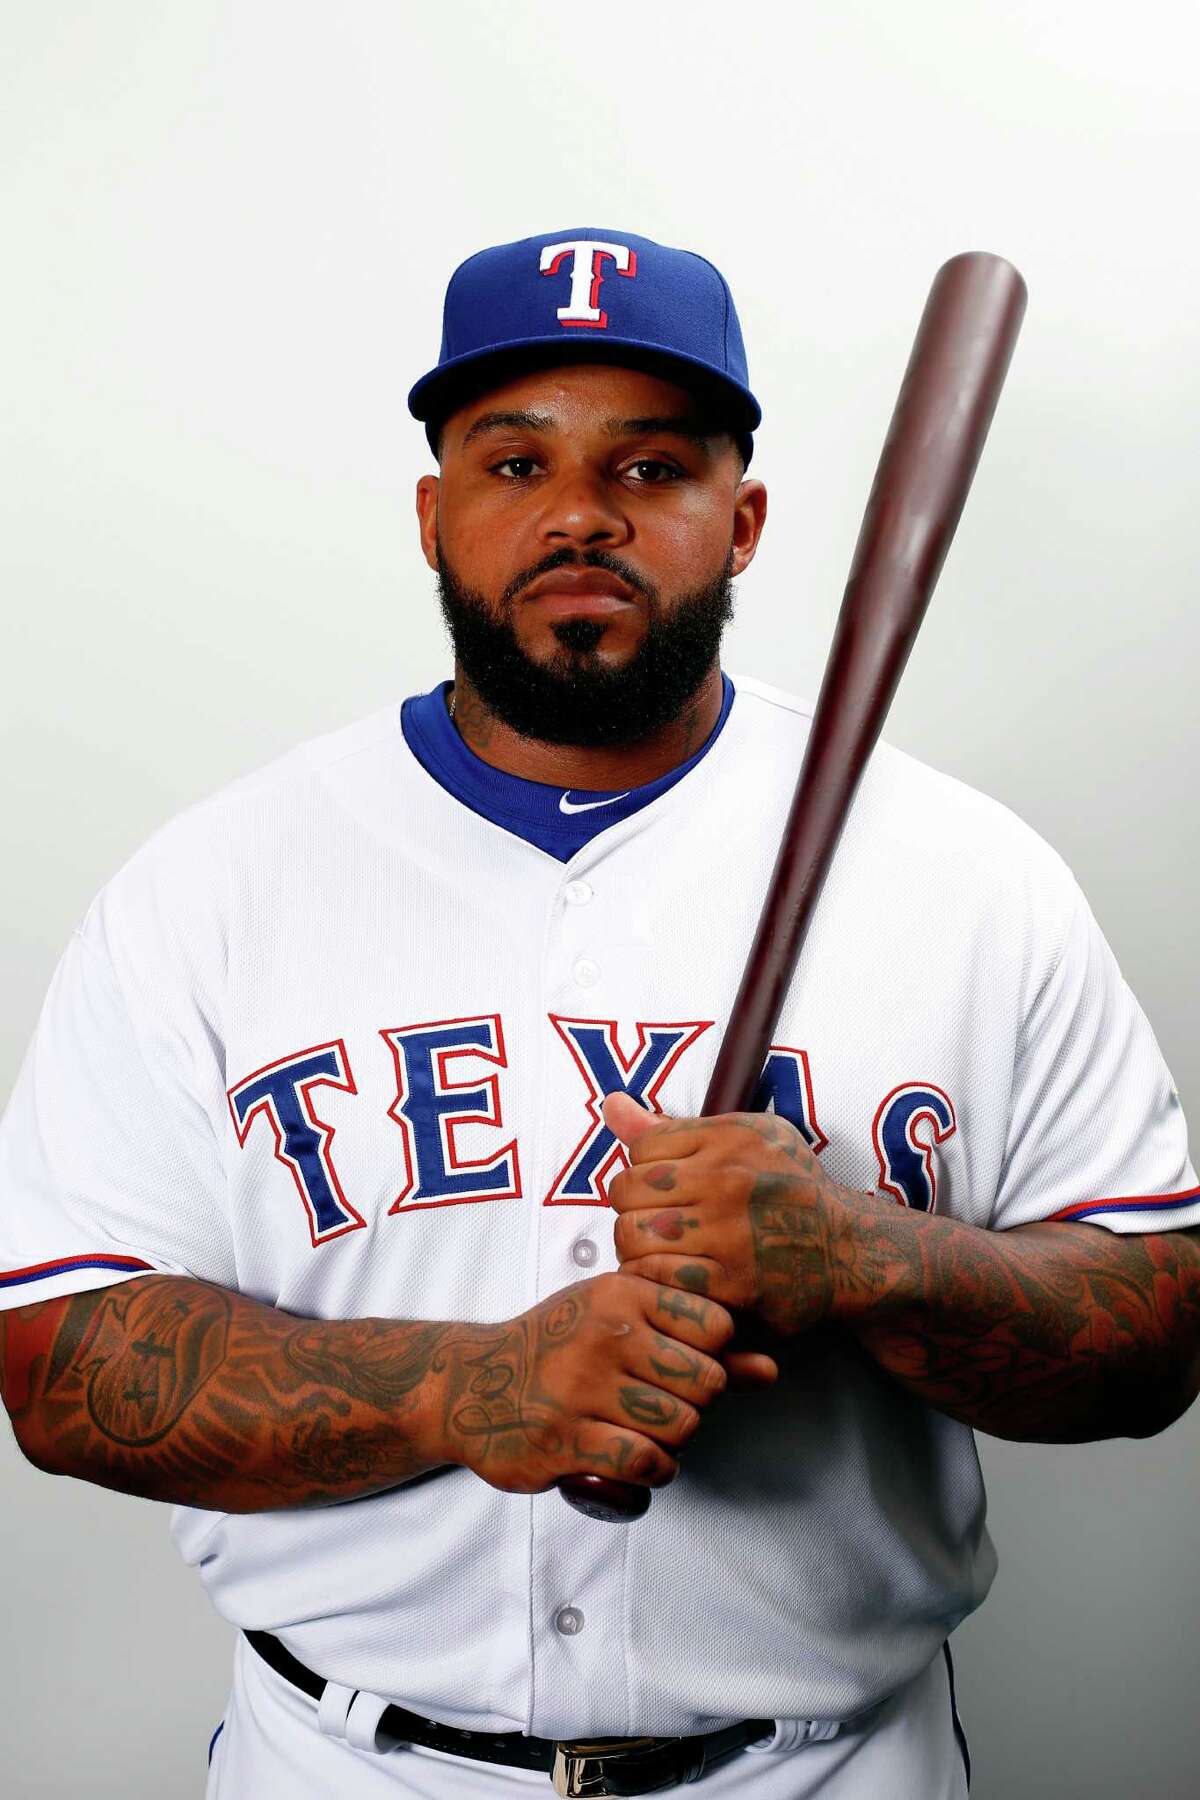 Rangers' Fielder expected to have season-ending neck surgery